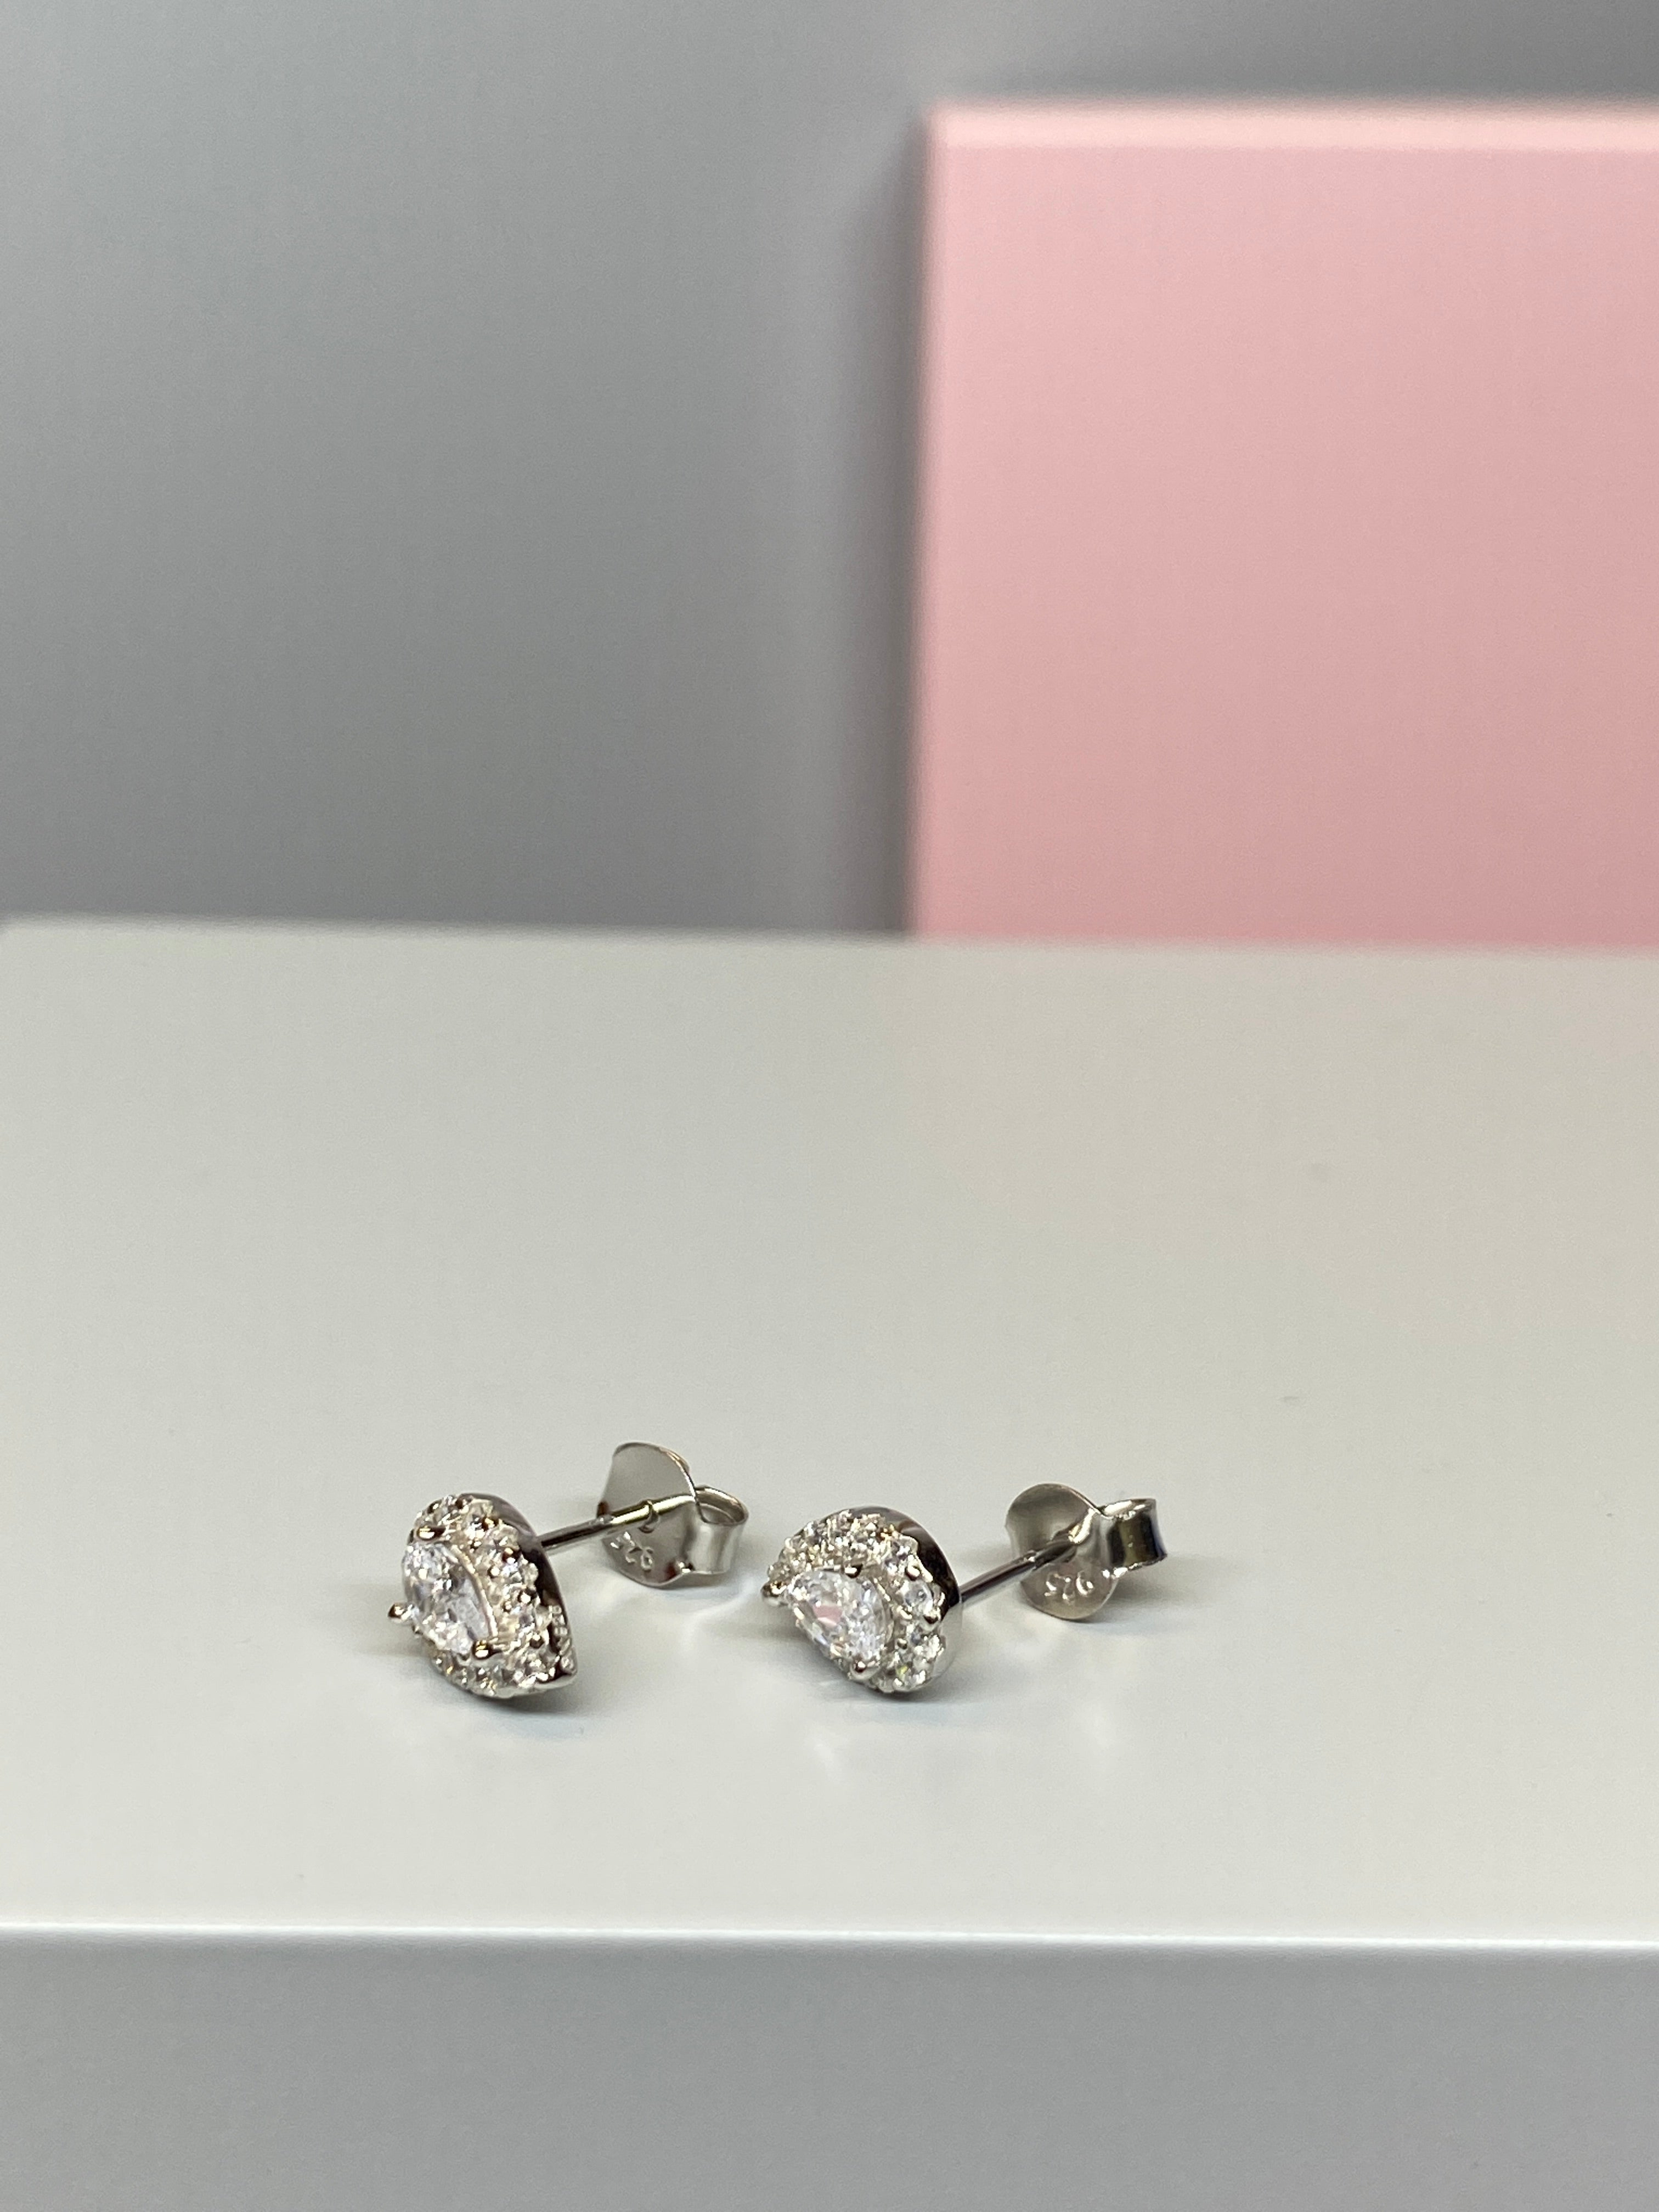 Sterling Silver Pear Shaped White and CZ Earrings - Hallmark Jewellers Formby & The Jewellers Bench Widnes